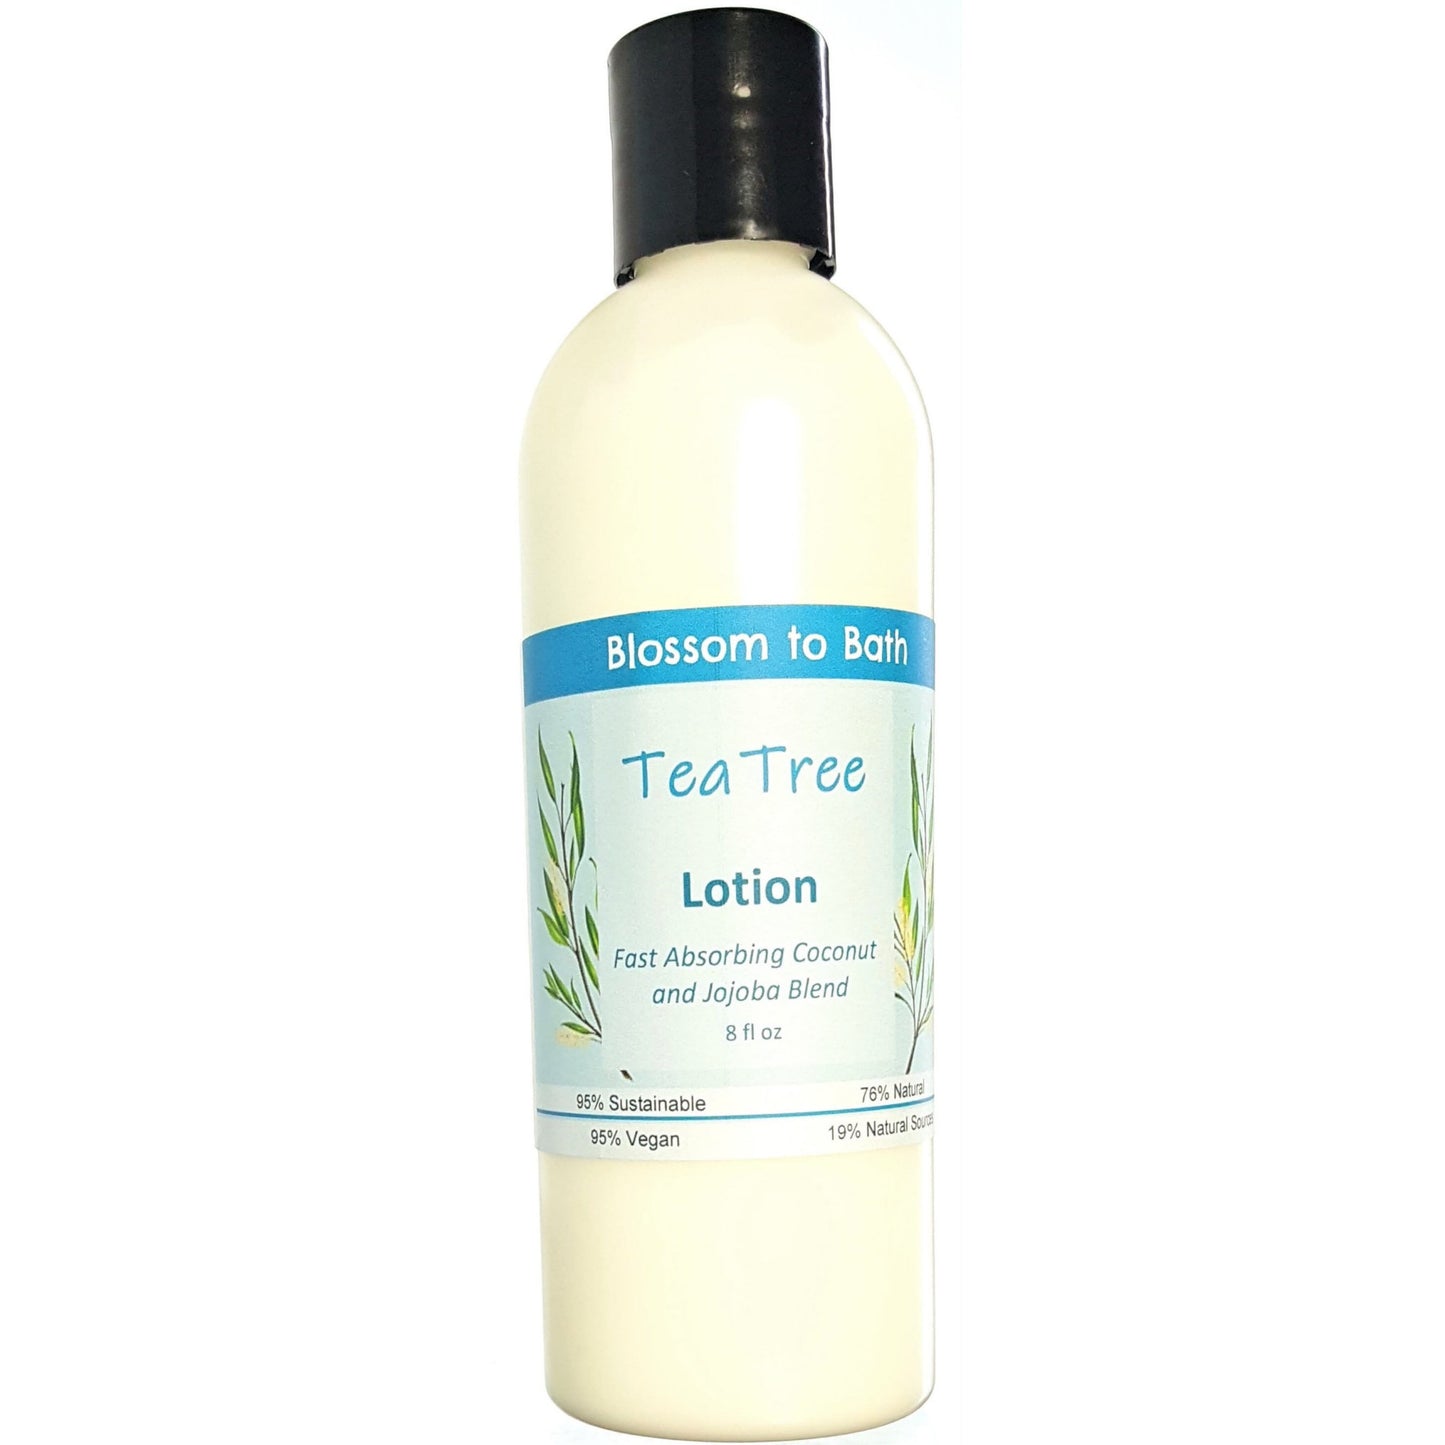 Buy Blossom to Bath Tea Tree Lotion from Flowersong Soap Studio.  Daily moisture luxury that soaks in quickly made with organic oils and butters that soften and smooth the skin  Tea tree's fresh fragrance embodies a deep down clean.